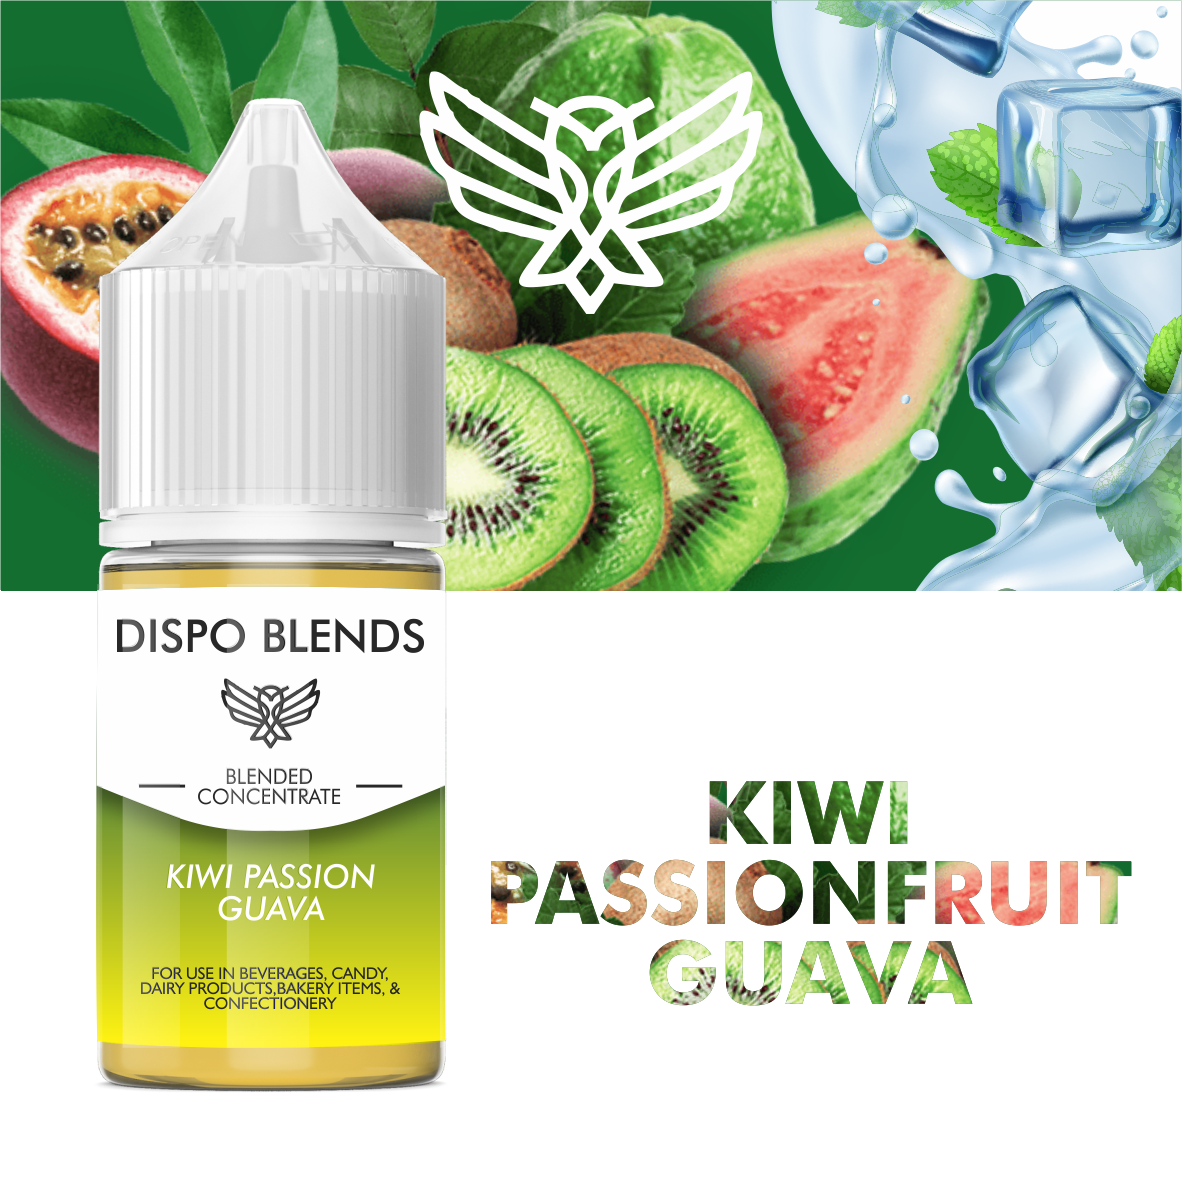 DispoBlends Blended Concentrate - Kiwi Passionfruit Guava (30ml)